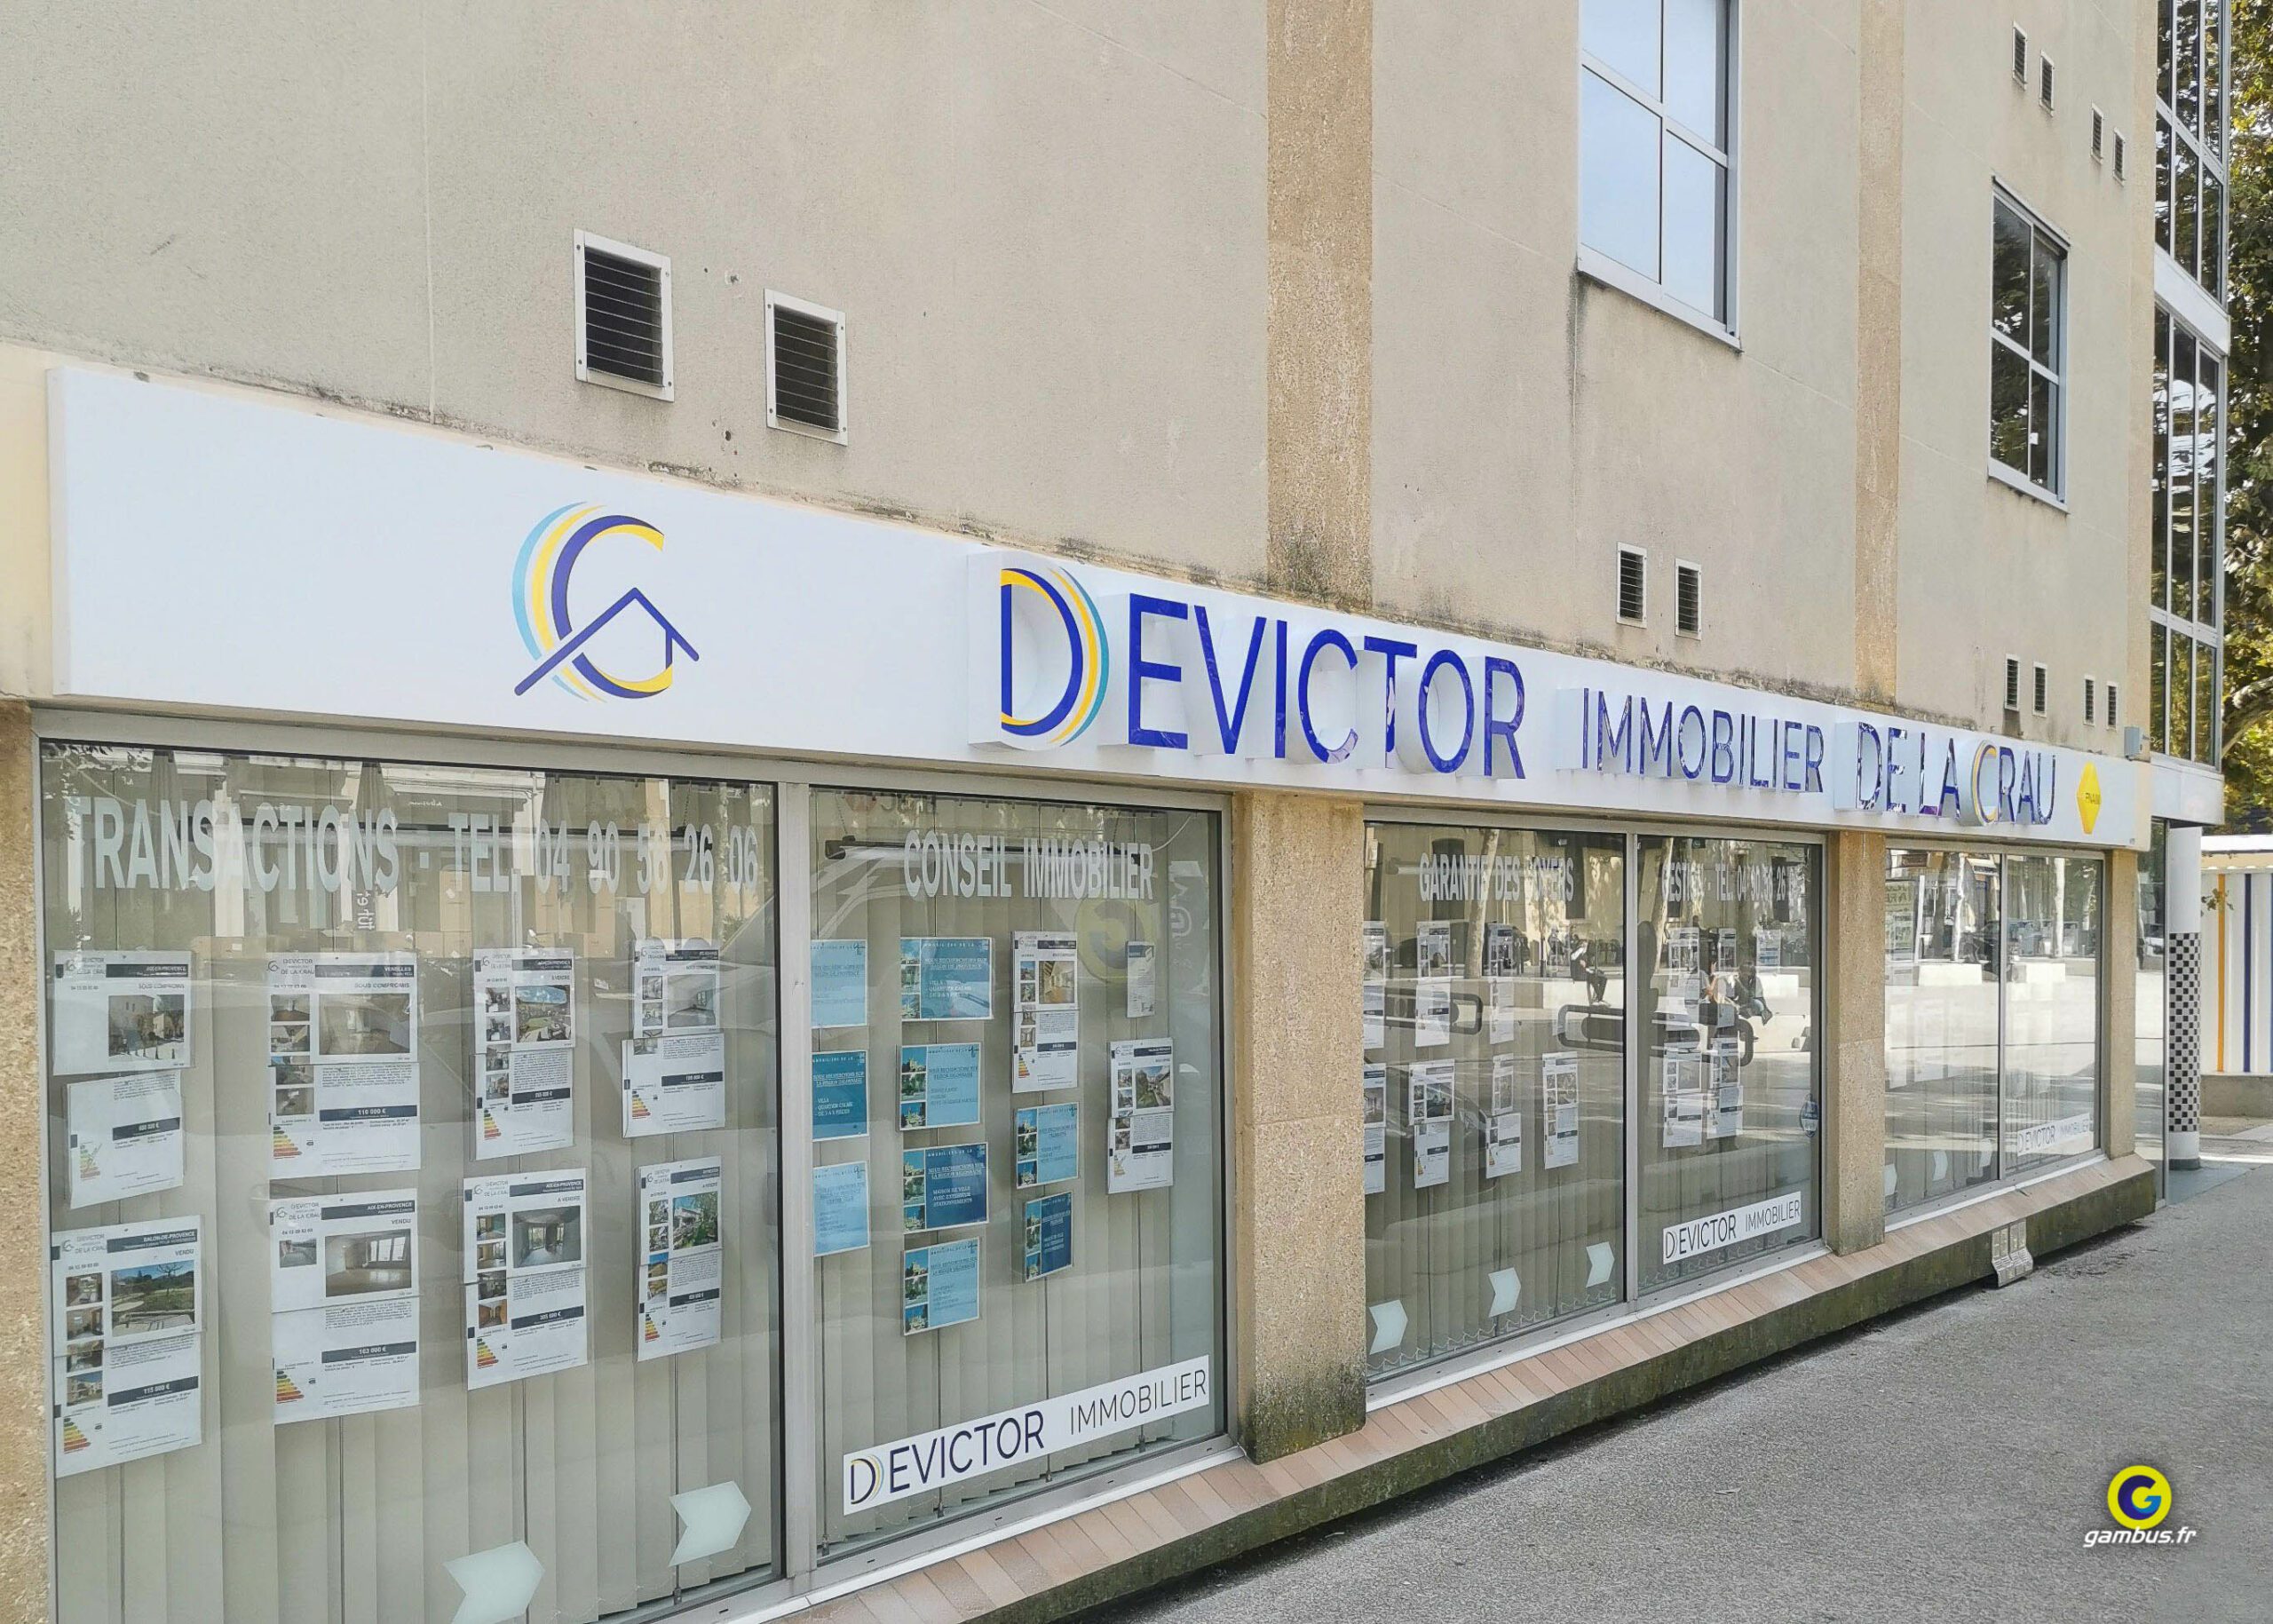 Devictor Immobilier 3 Scaled, Gambus Enseignes